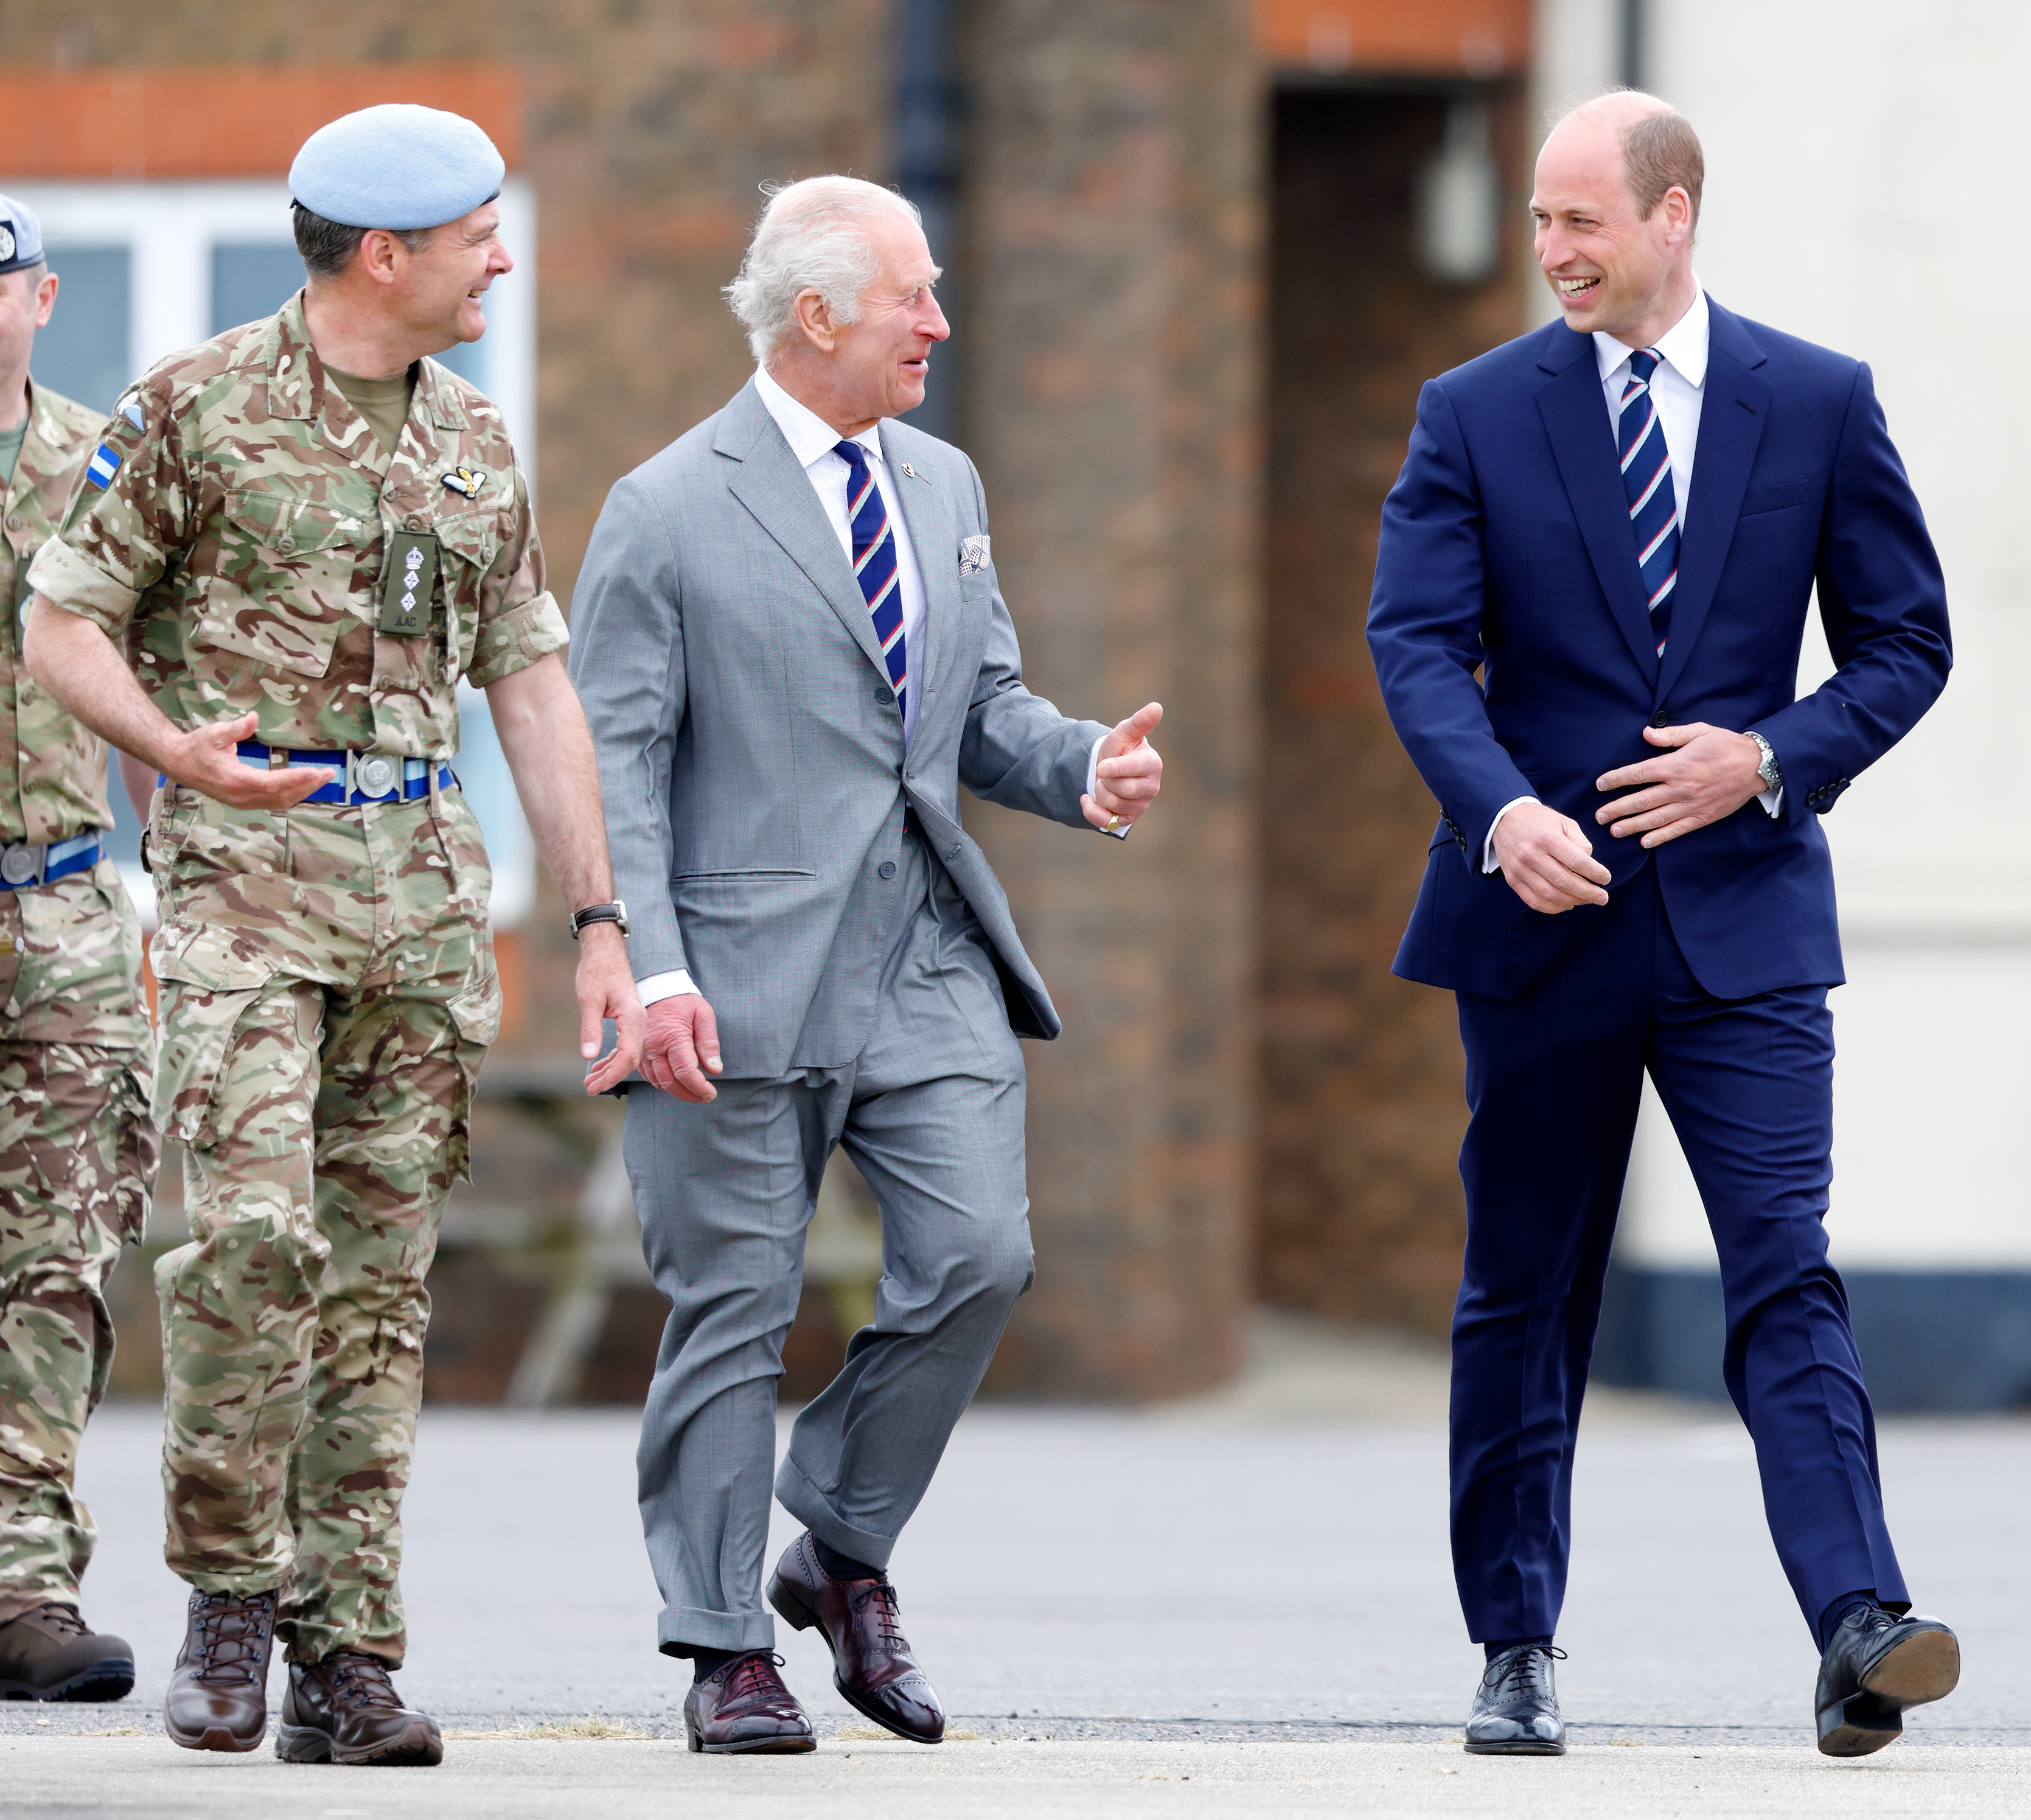 King Charles III and Prince William at the Army Aviation Centre in Middle Wallop, Stockbridge, United Kingdom on May 13, 2024. | Source: Getty Images